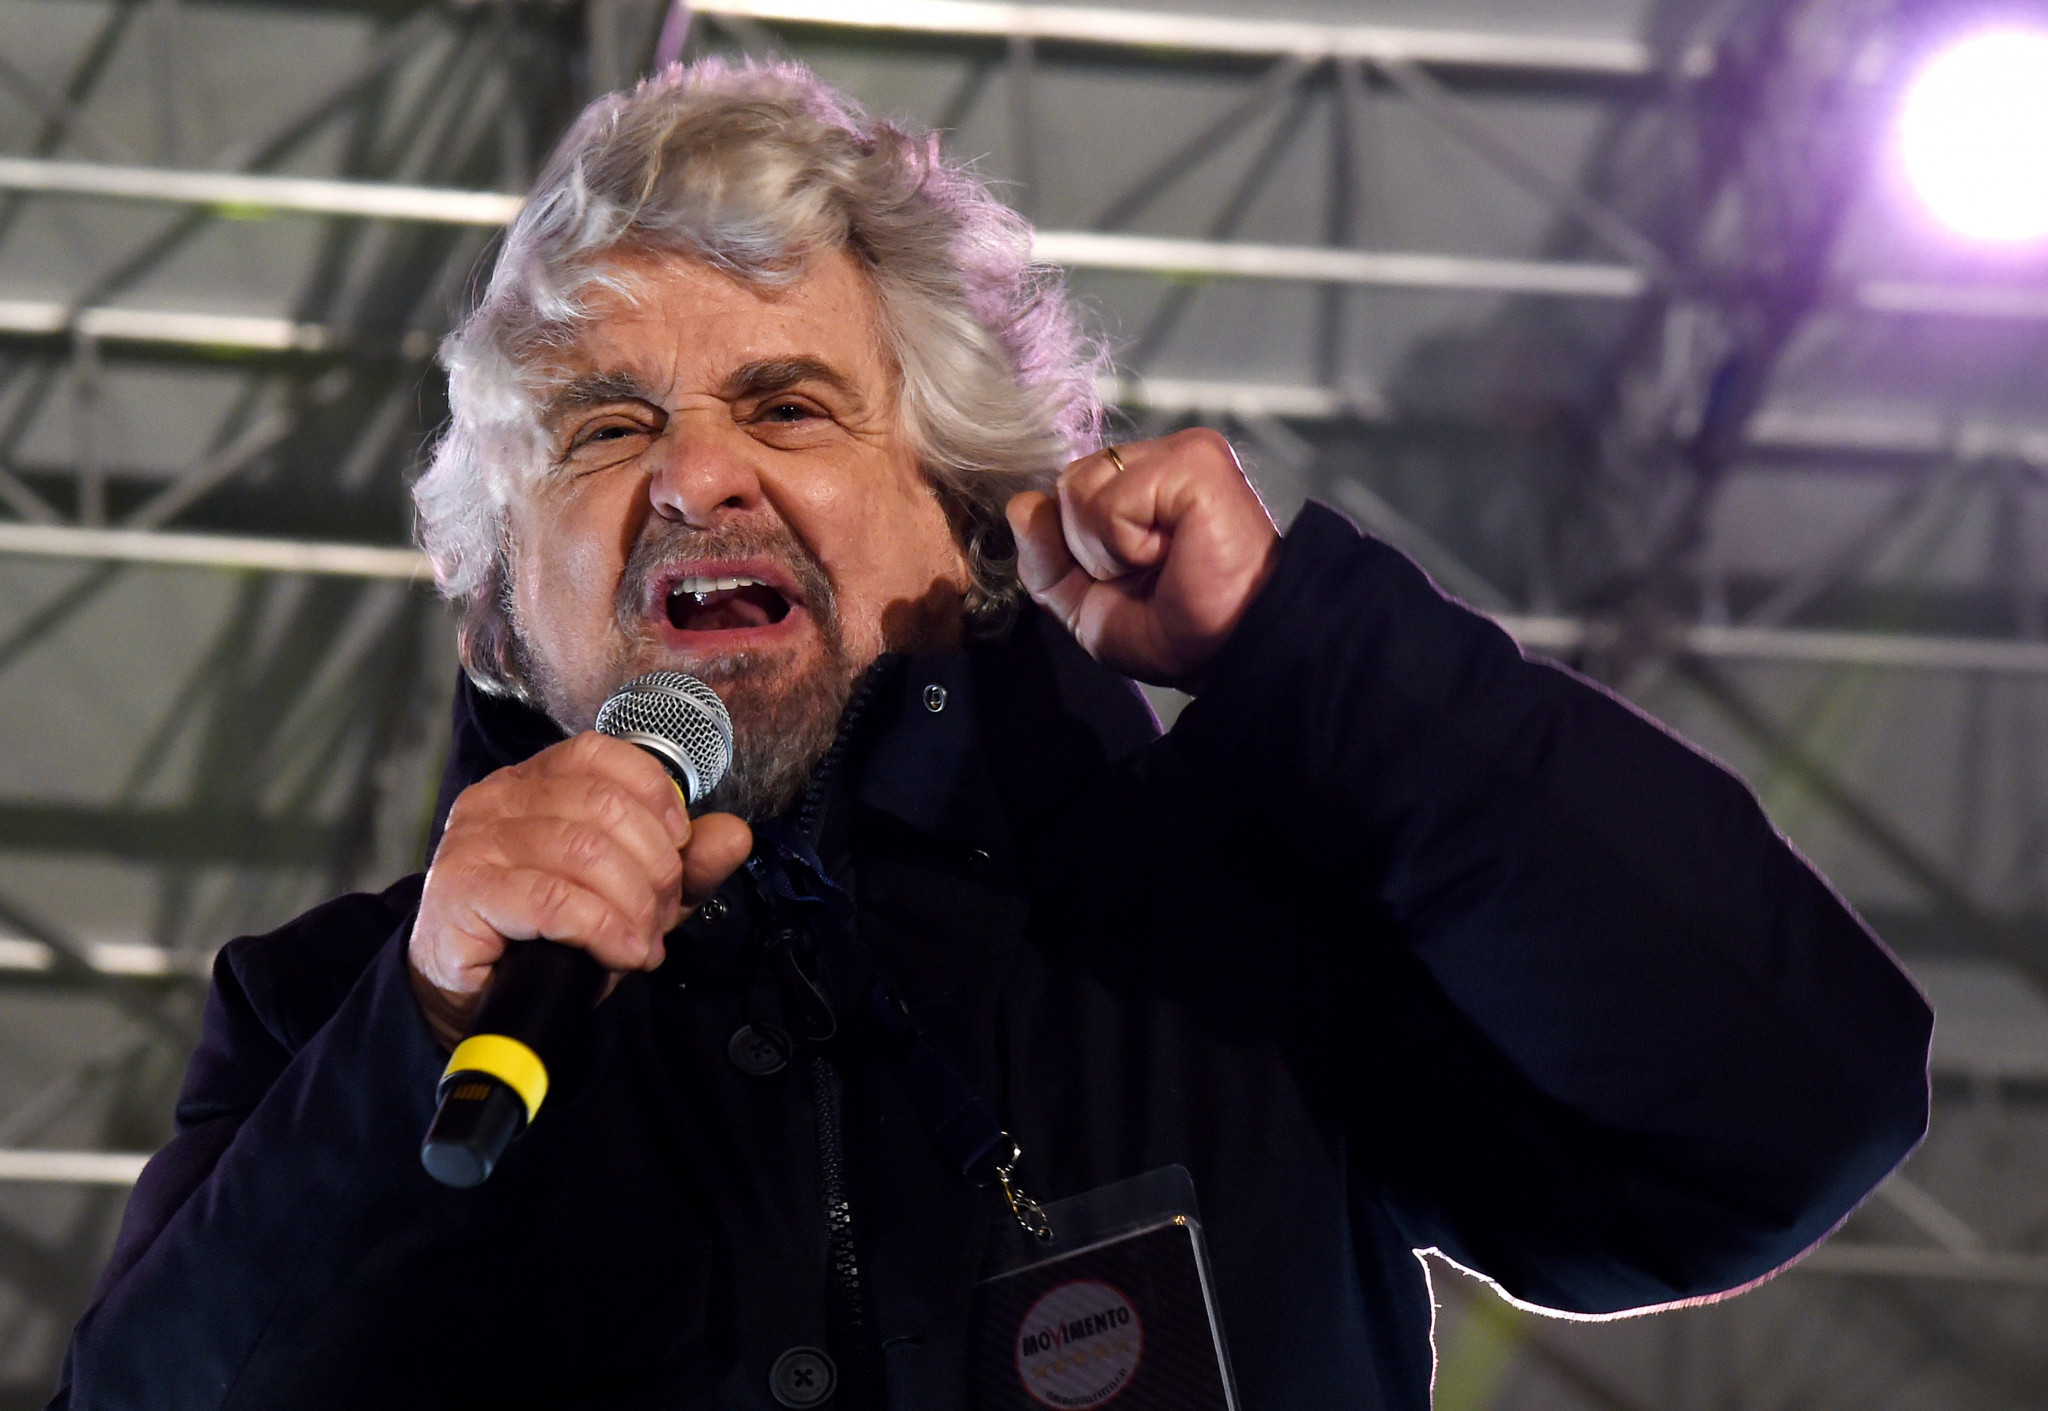 Beppe Grillo was an unlikely backer for a Turin Olympic bid ©Getty Images